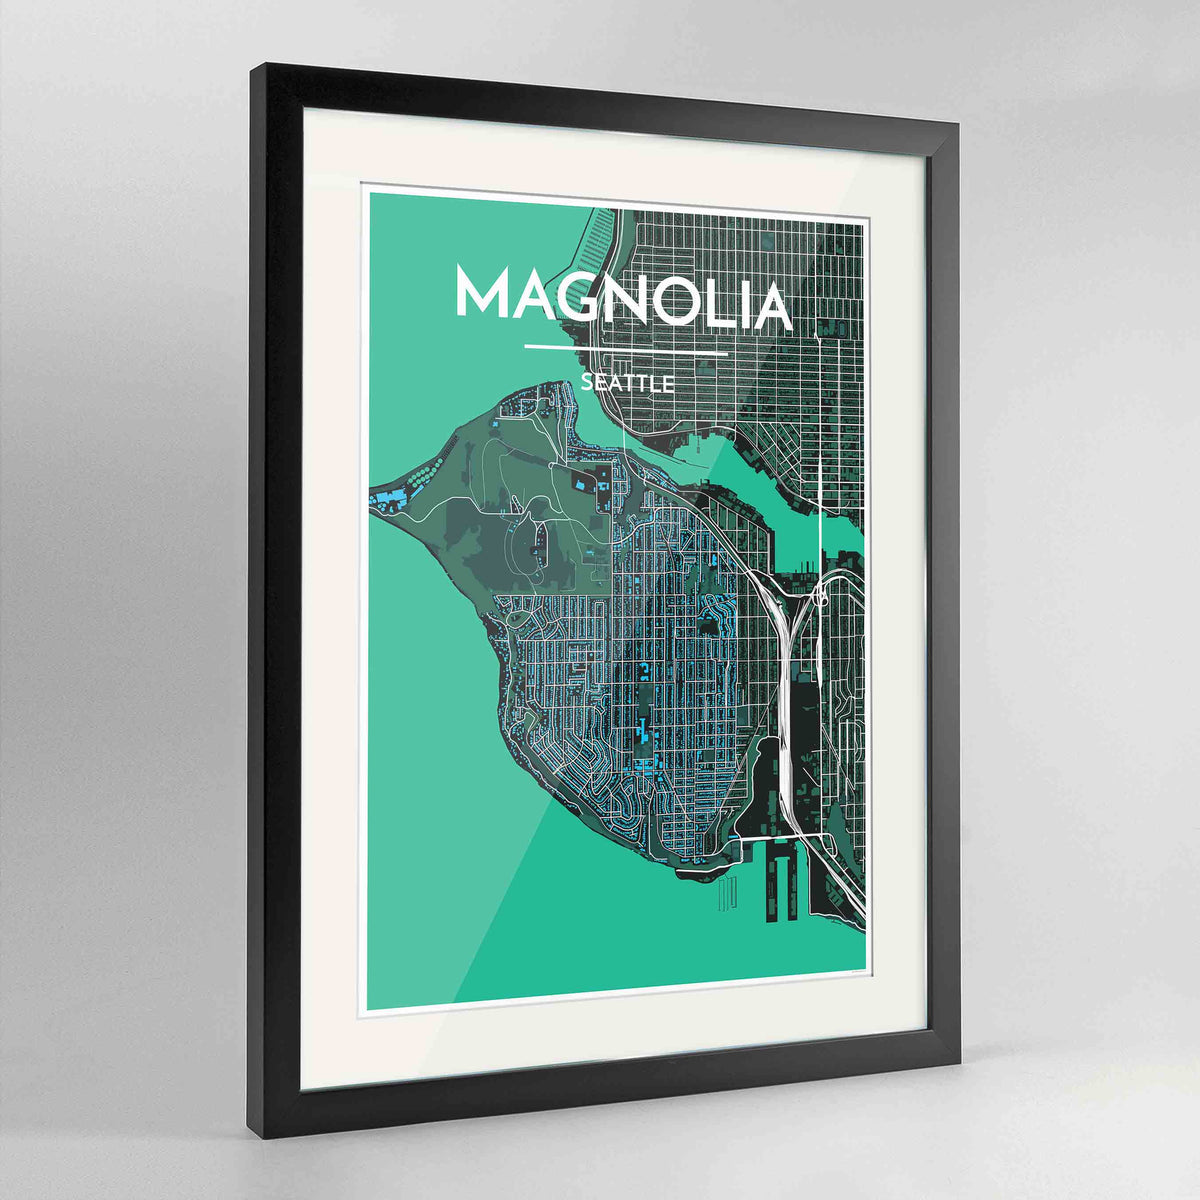 Framed Seattle Magnolia Neighbourhood Map Art Print 24x36&quot; Contemporary Black frame Point Two Design Group